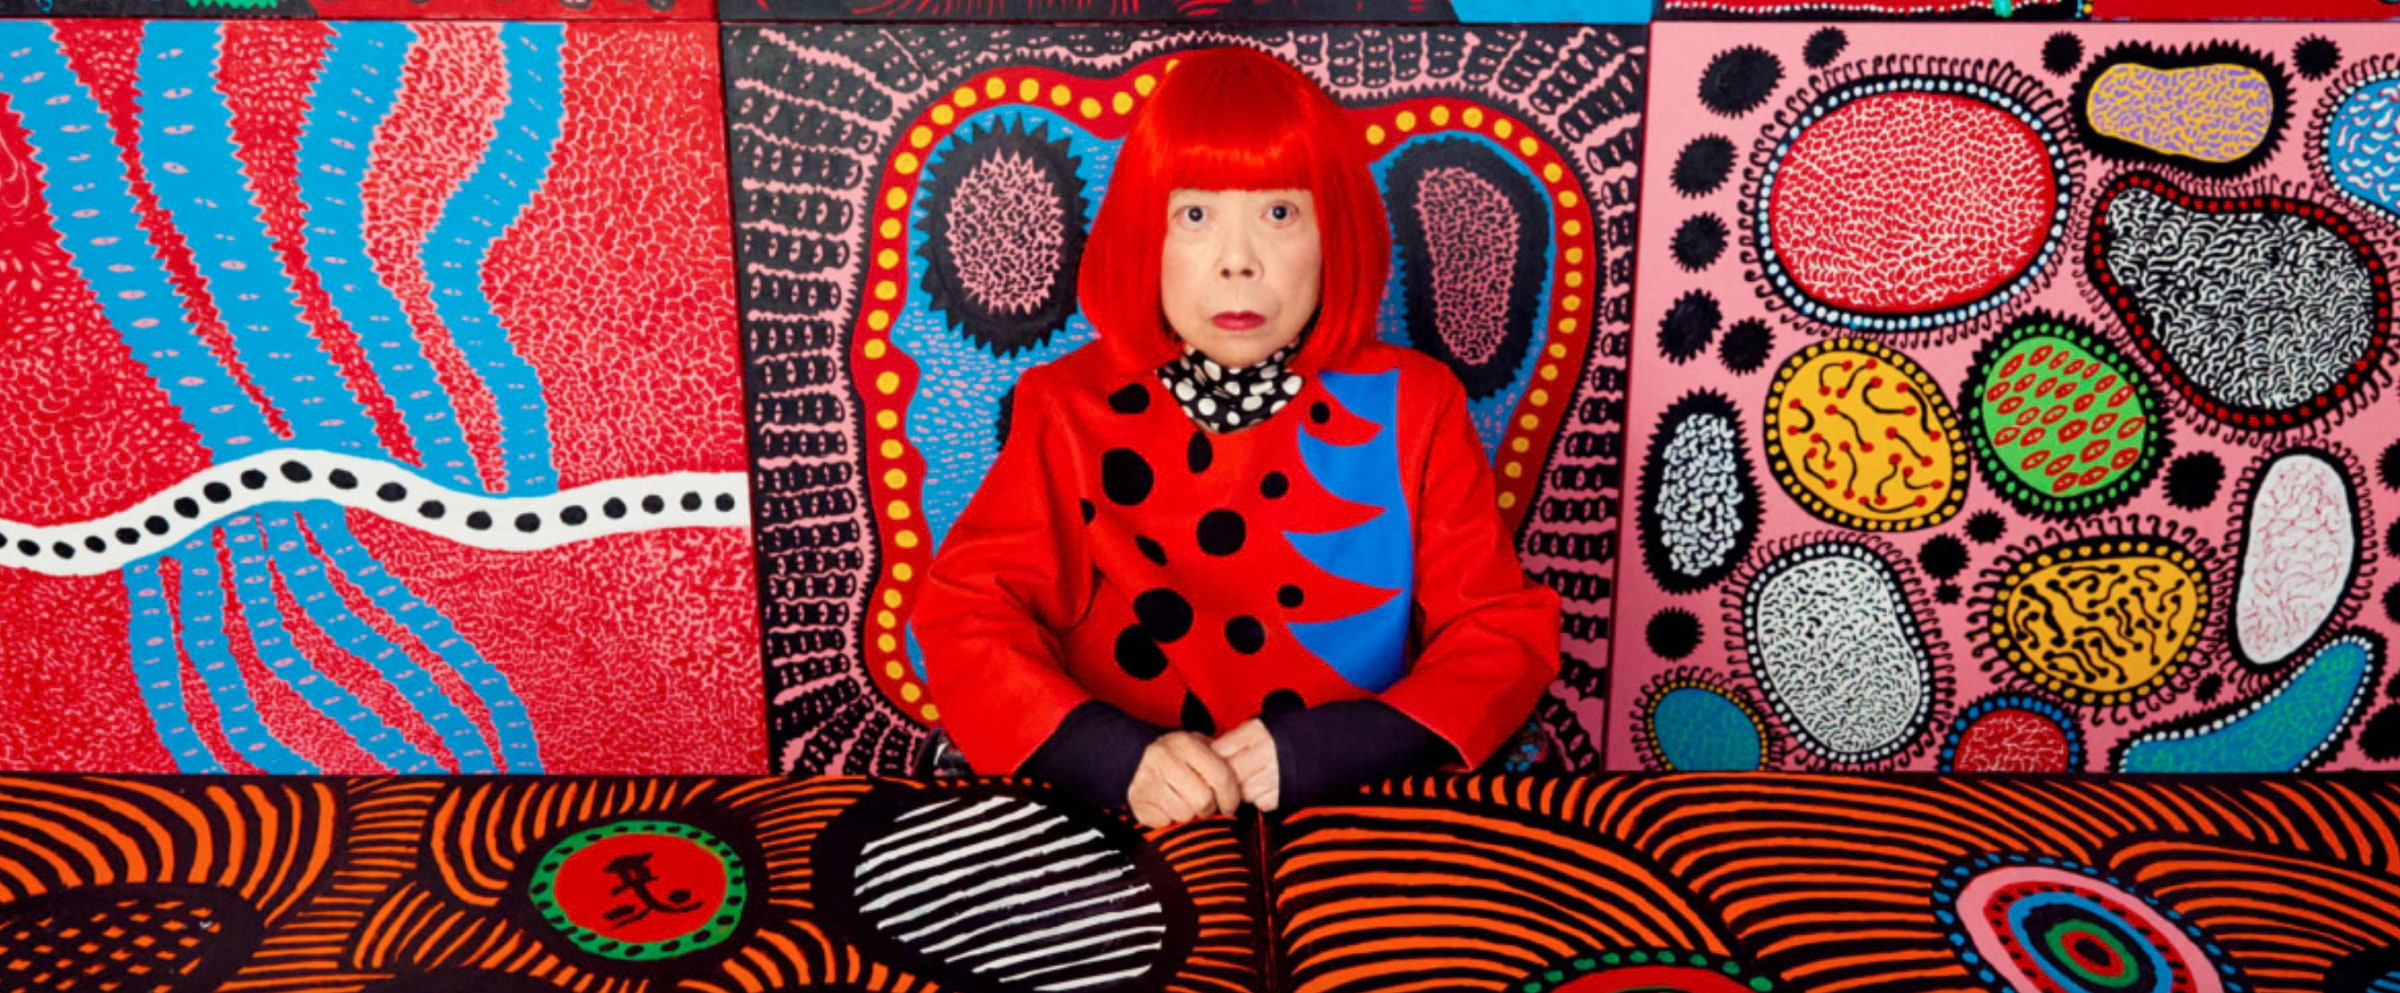 Check out Yayoi Kusama's Infinity Mirror Room and other works for free